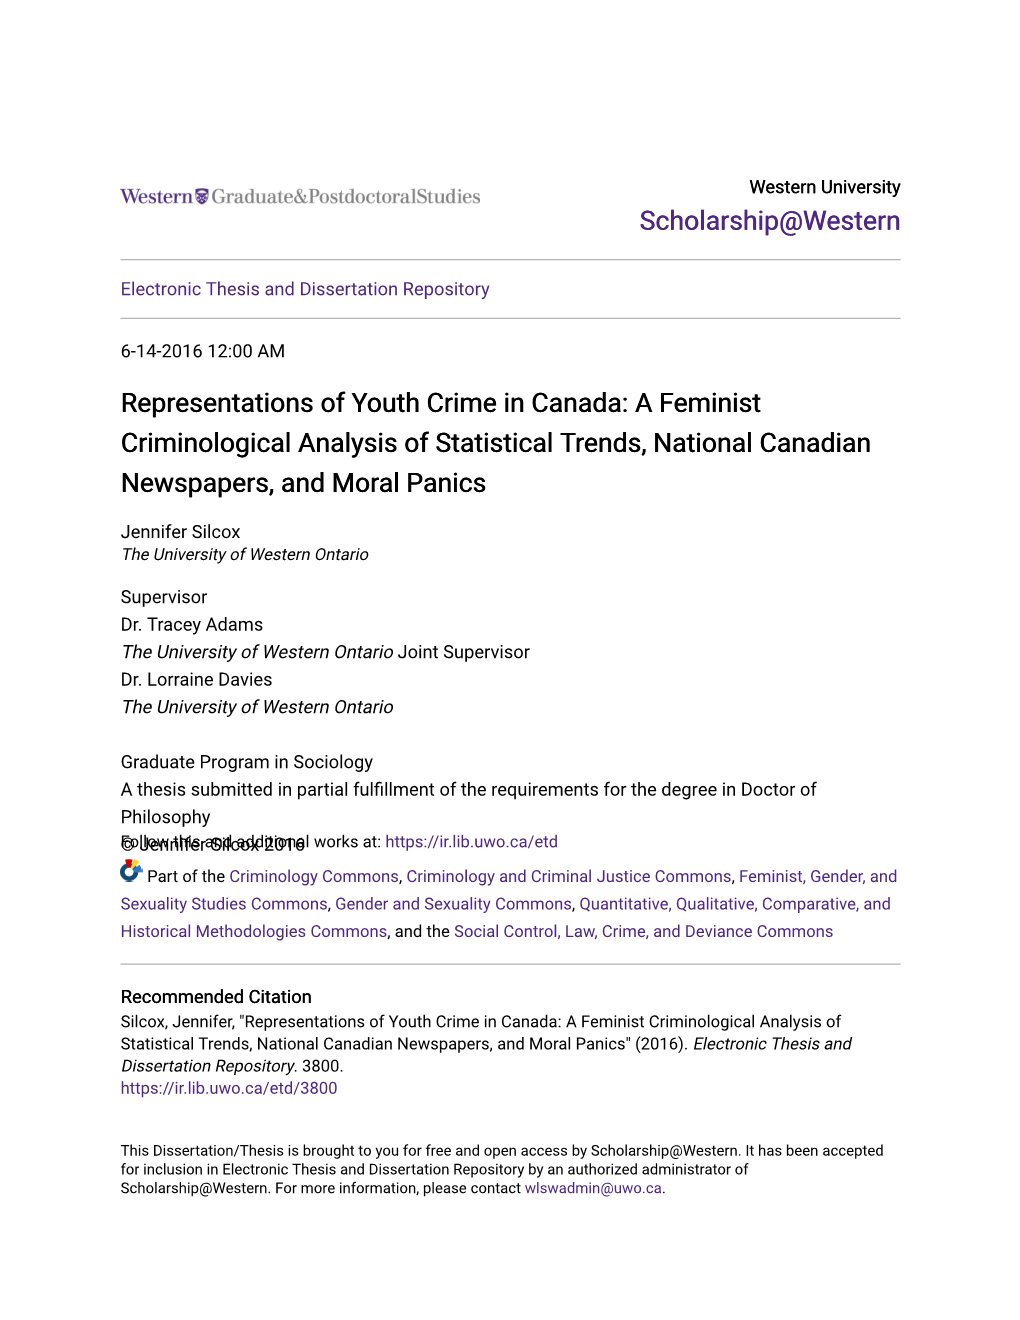 Representations of Youth Crime in Canada: a Feminist Criminological Analysis of Statistical Trends, National Canadian Newspapers, and Moral Panics